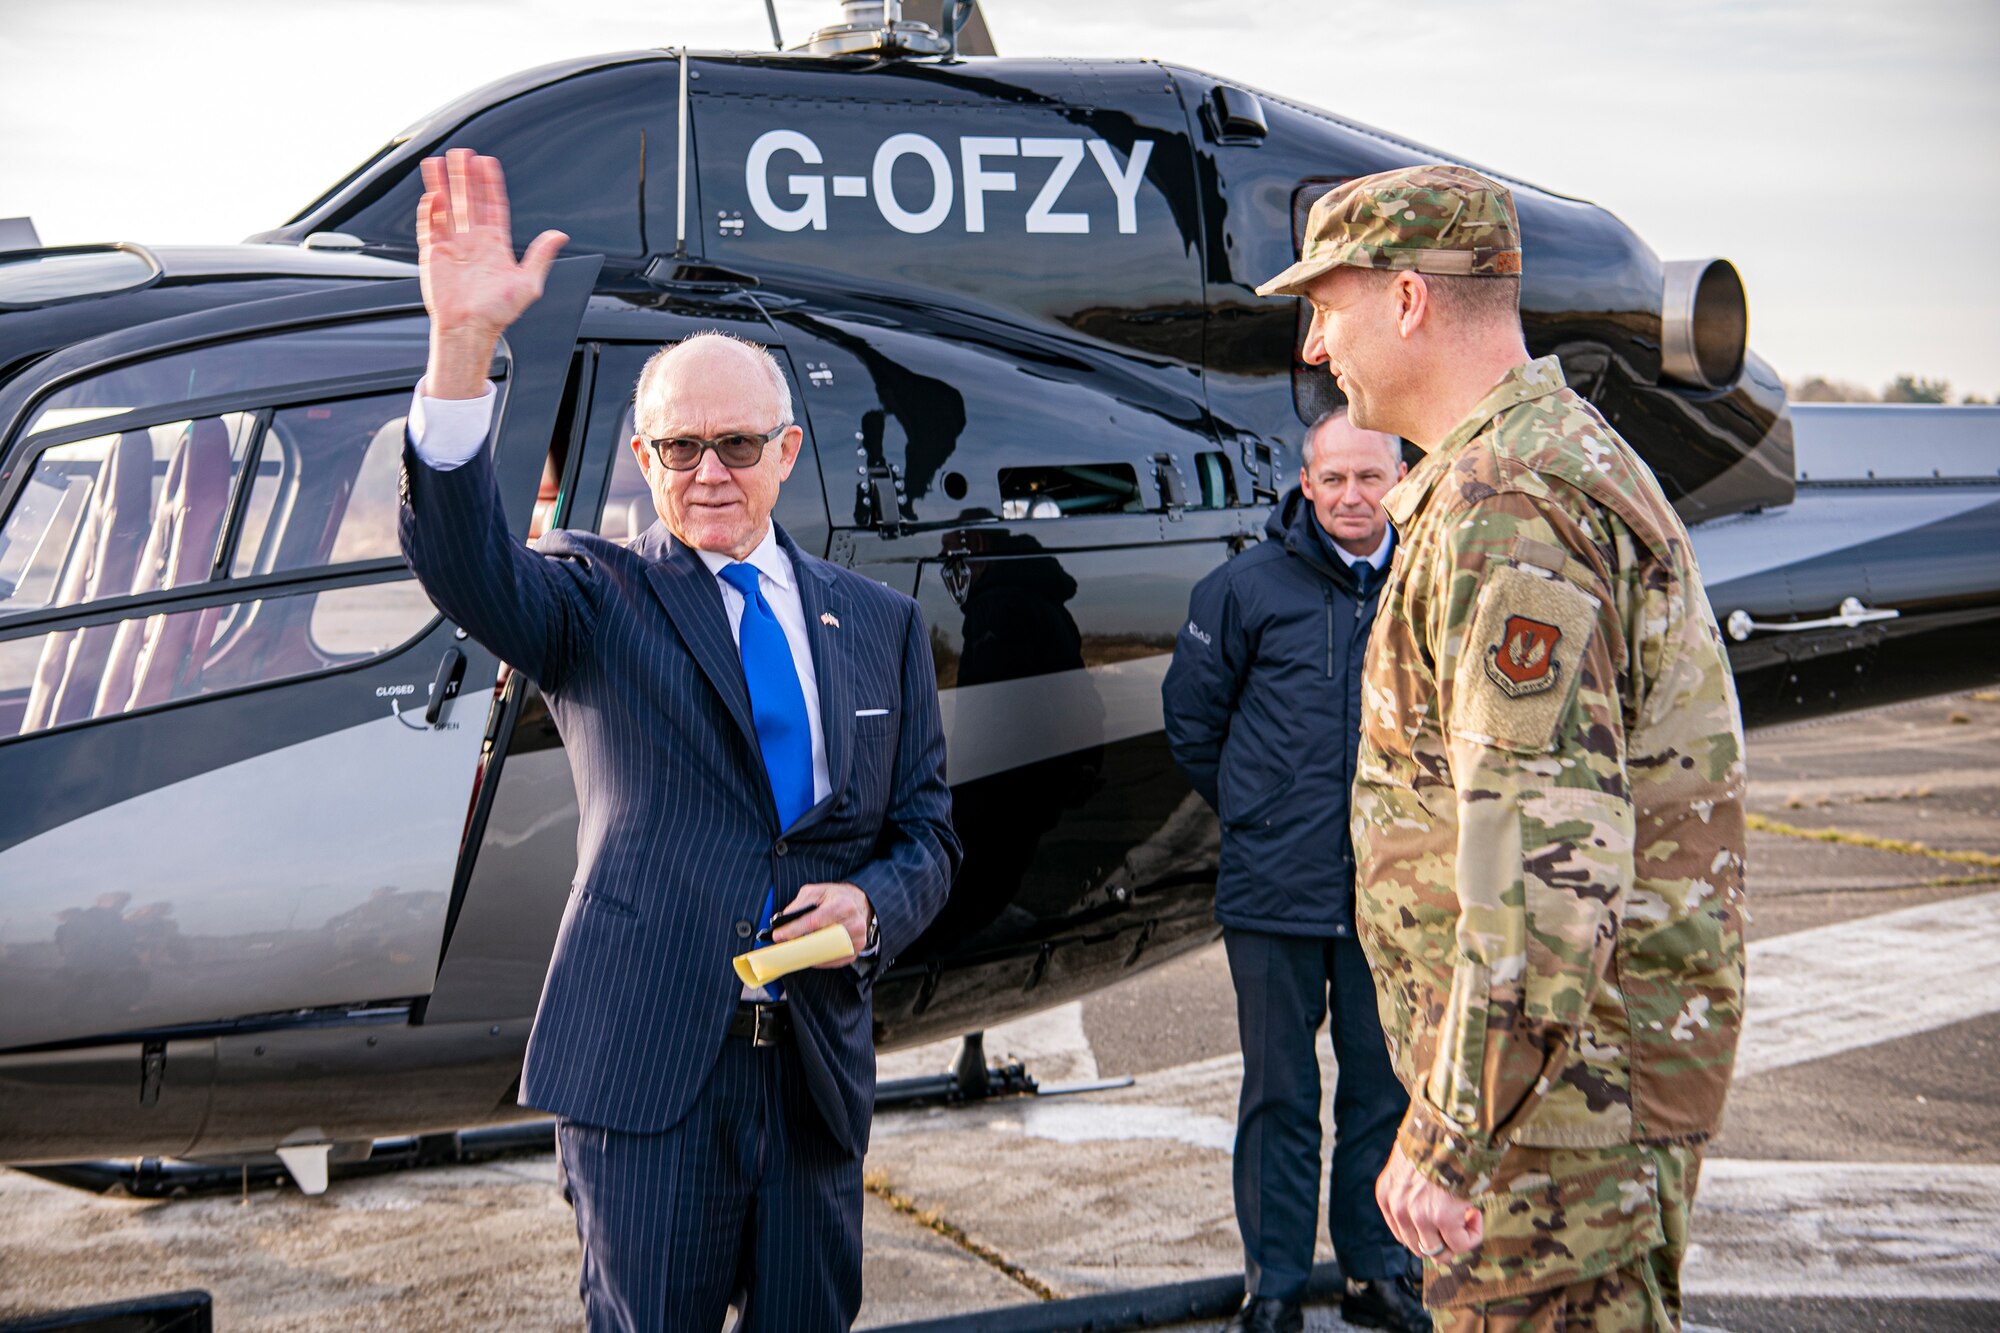 United States Ambassador to the United Kingdom, Robert Wood Johnson, (left), waves good bye following a visit to RAF Molesworth, England, Feb. 7, 2020.  Johnson visited RAF Molesworth, which is part of the 501st Combat Support Wing, to build more relationships with personnel and gain a better understanding of their overall mission, capabilities and comprehensive duties. (U.S. Air Force photo by Senior Airman Eugene Oliver)